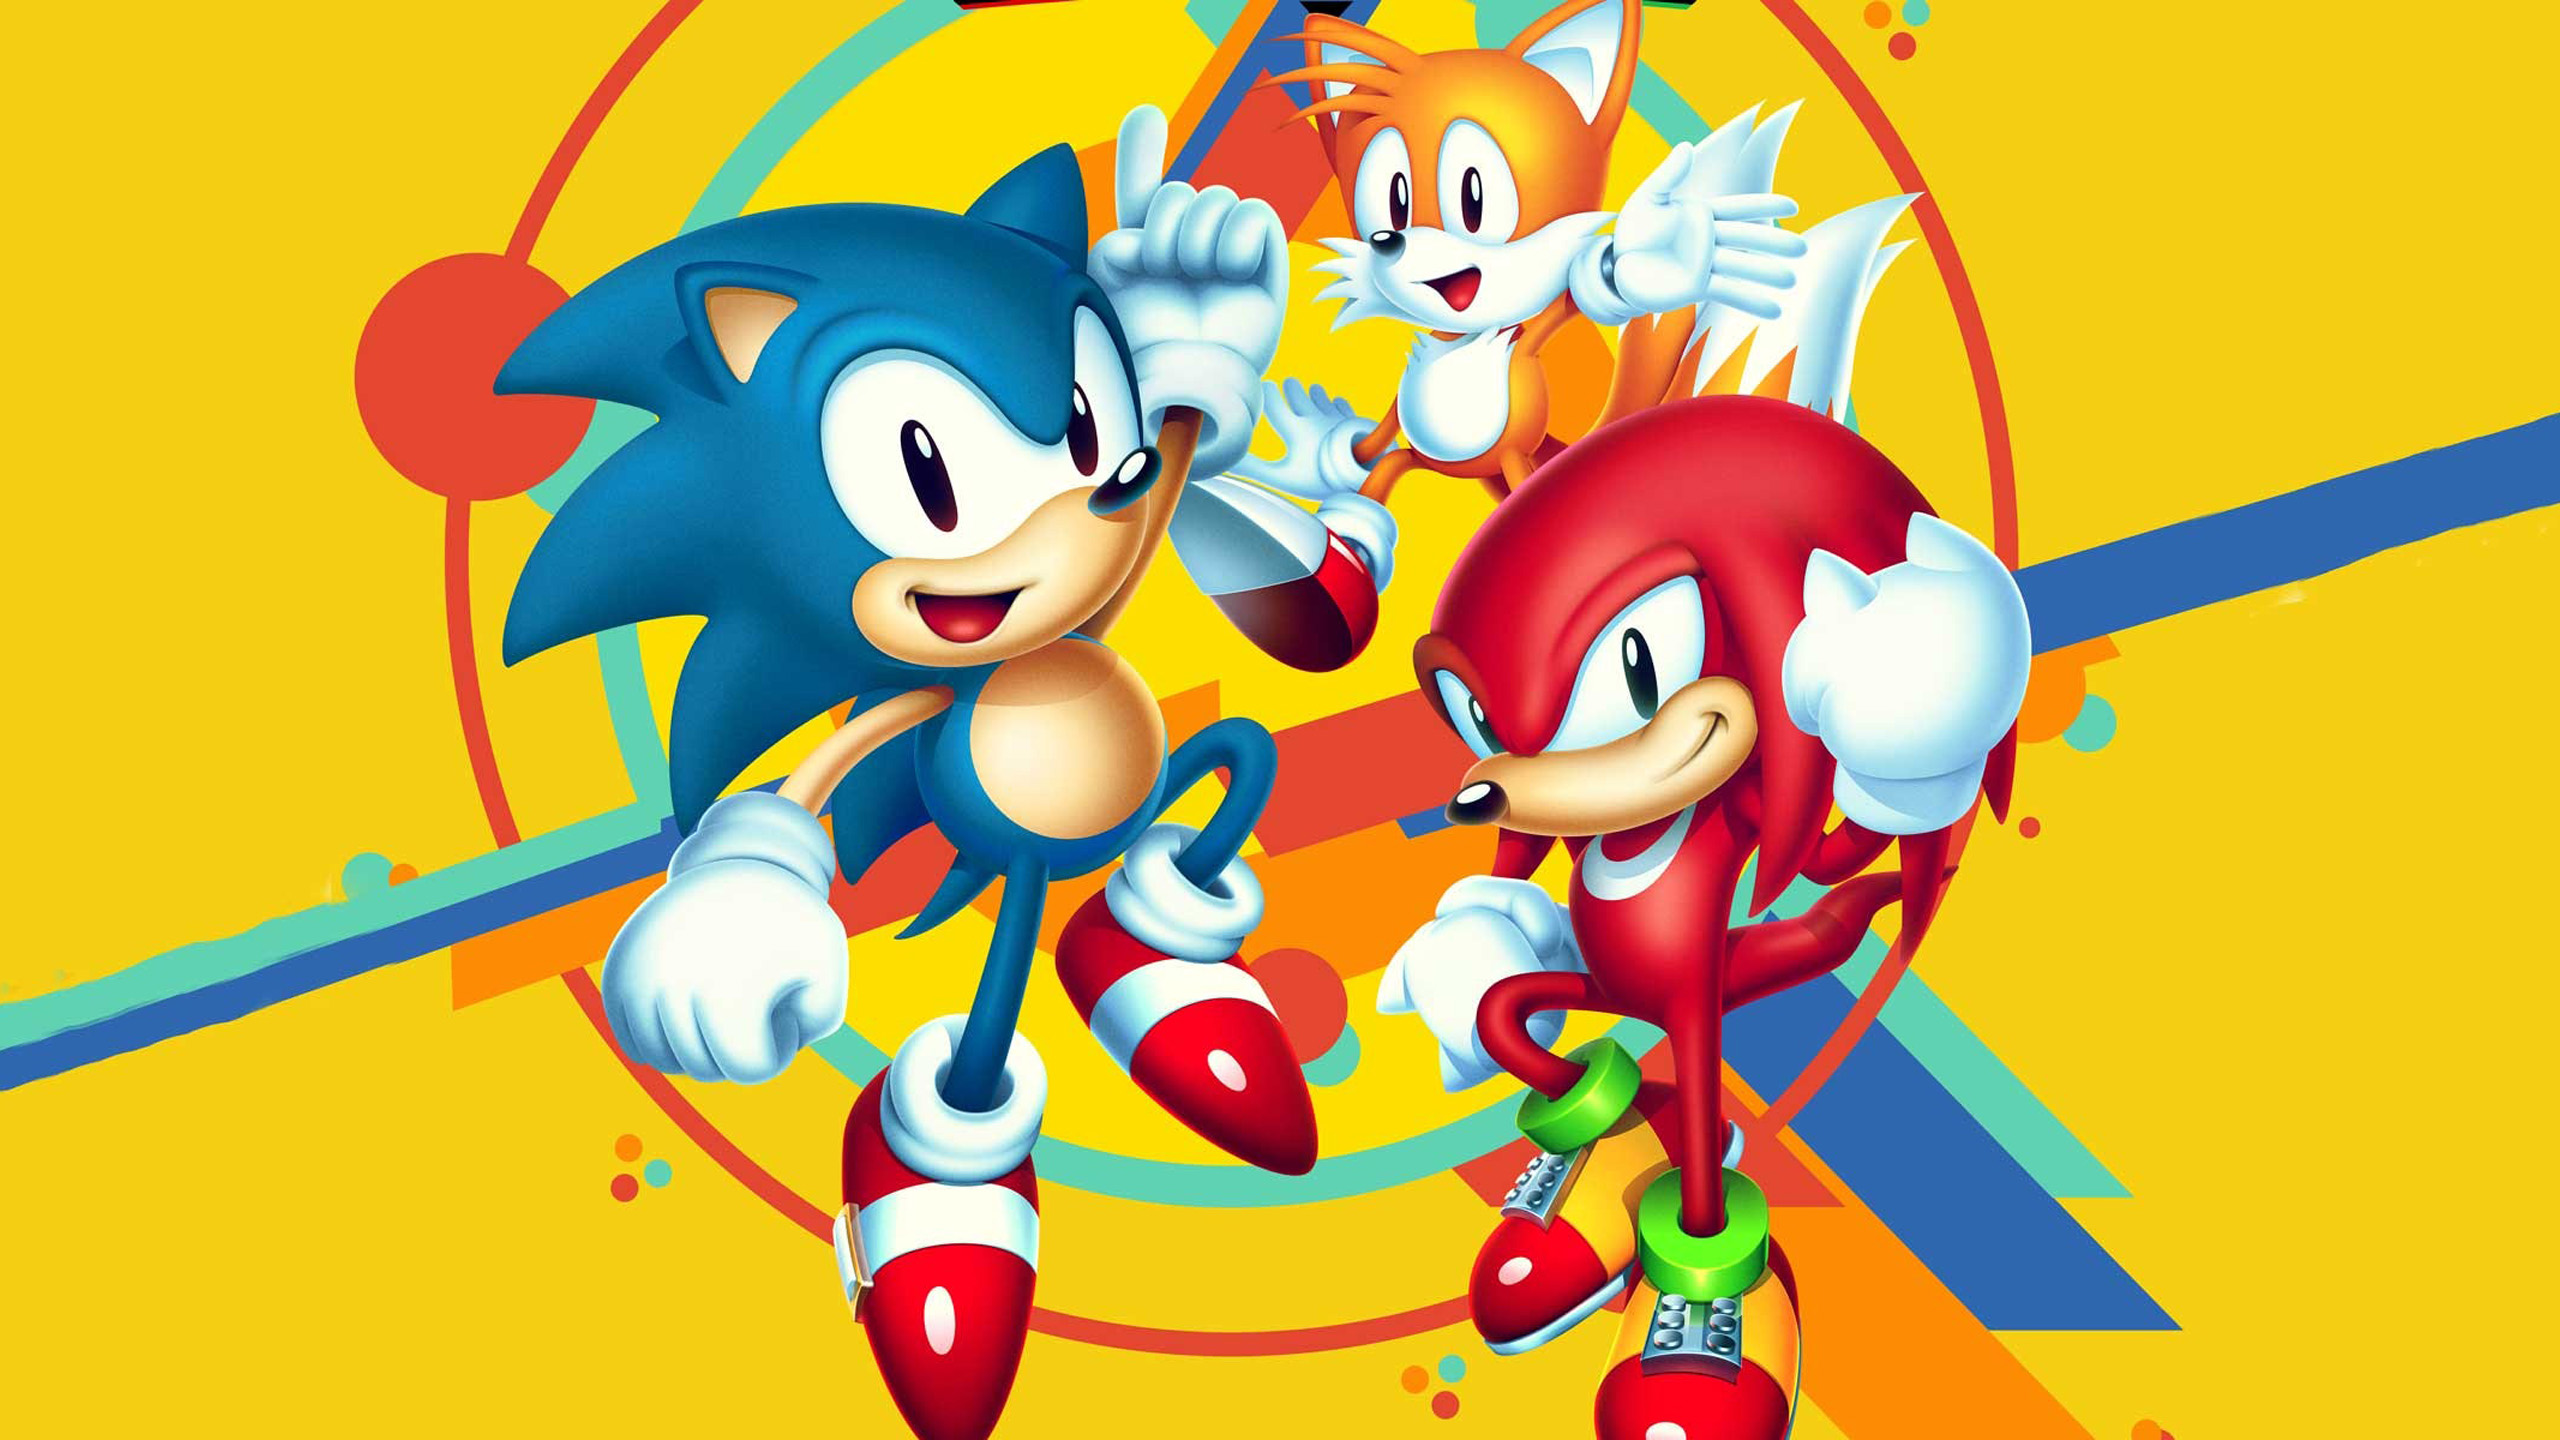 Knuckles the Echidna Miles Tails Prower Sonic the Hedgehog HD Sonic Mania